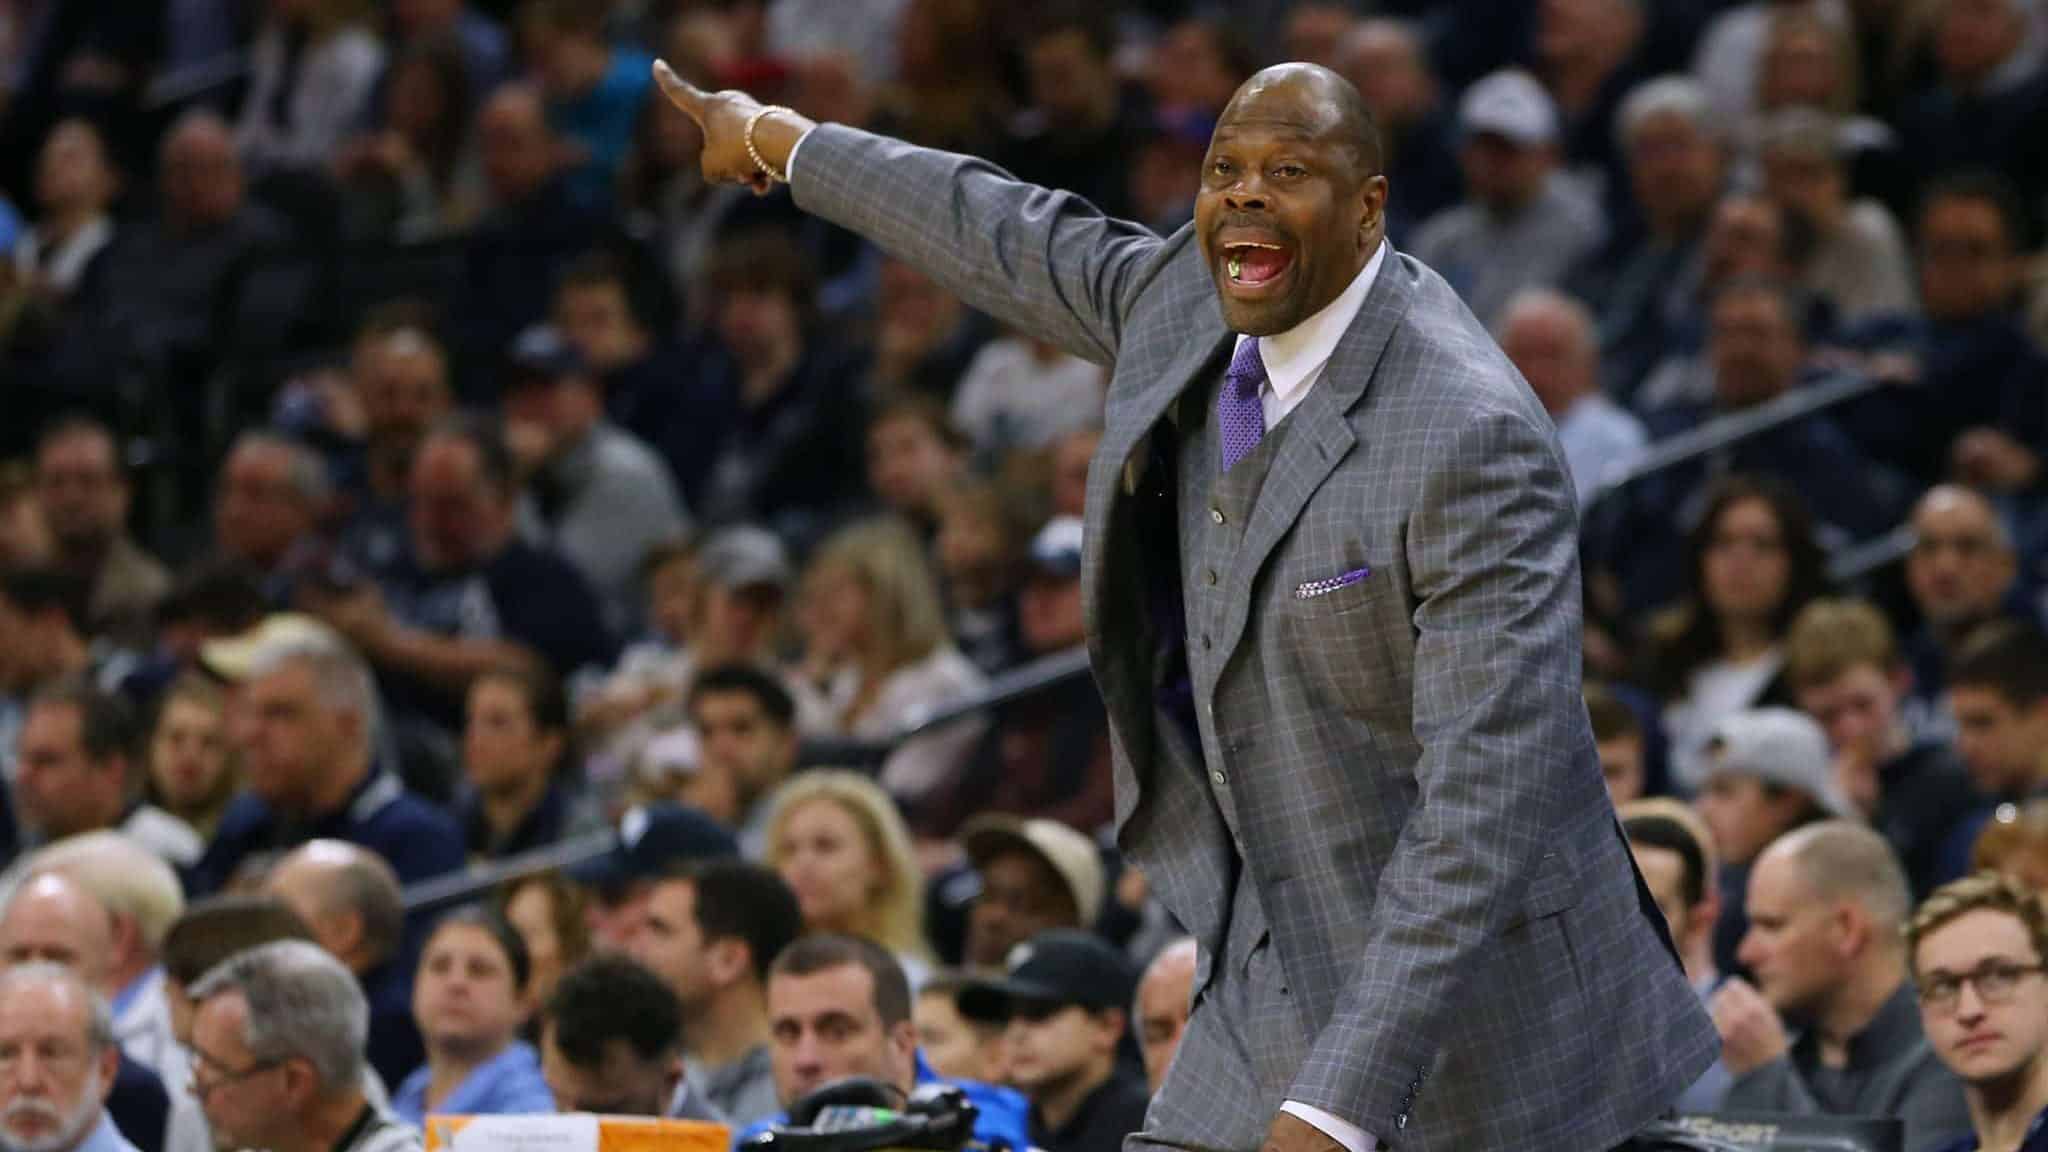 PHILADELPHIA, PA - JANUARY 11: Head coach Patrick Ewing of the Georgetown Hoyas signals to his team against the Villanova Wildcats during the second half of a college basketball game at Wells Fargo Center on January 11, 2020 in Philadelphia, Pennsylvania. Villanova defeated Georgetown 80-66.